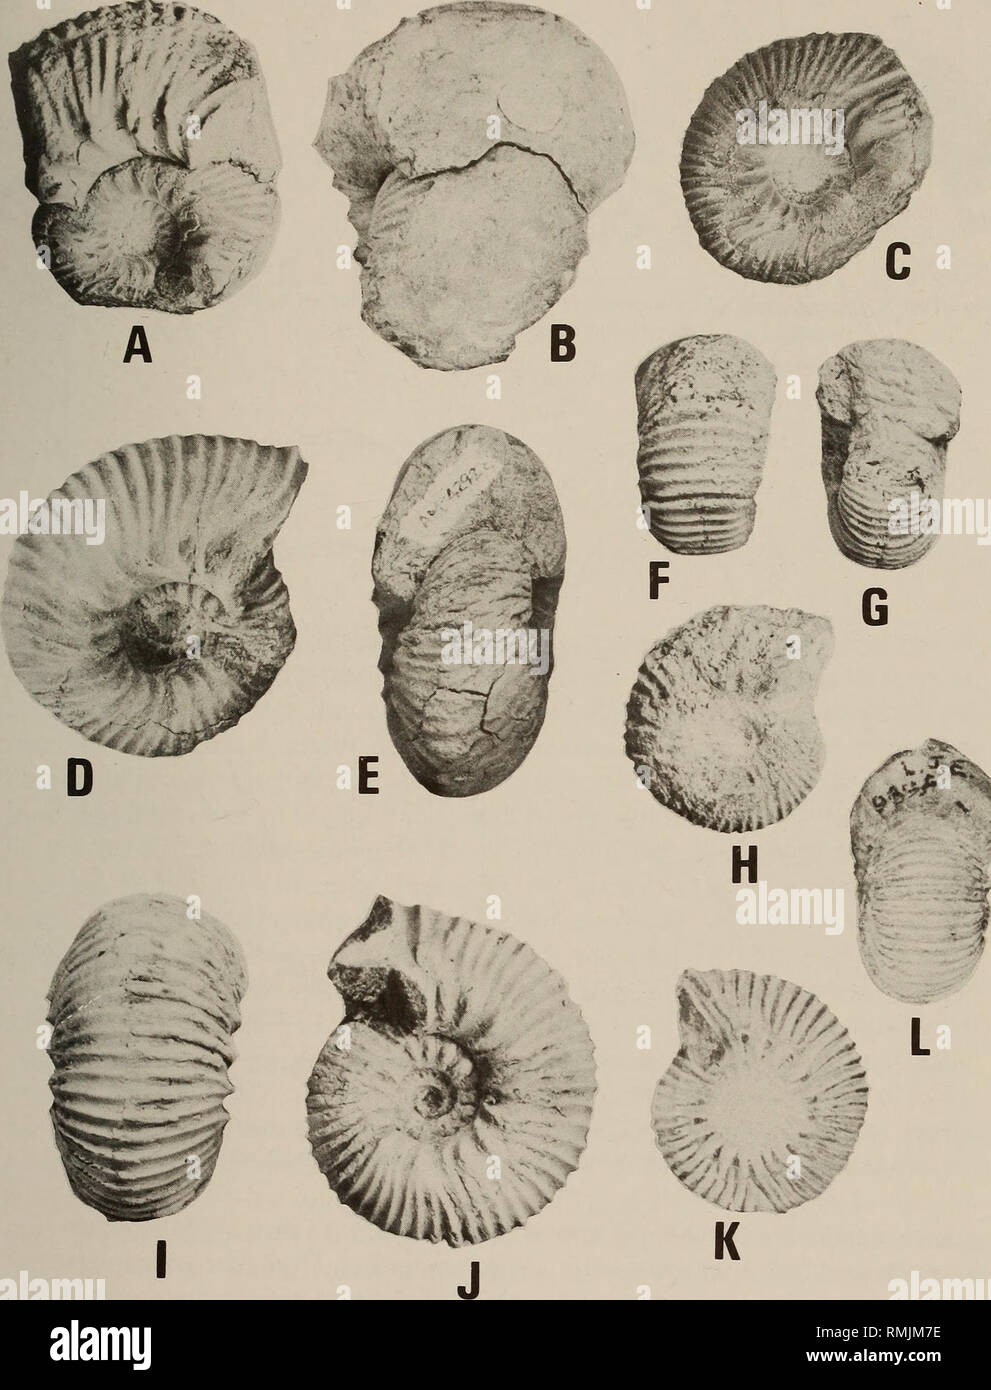 . Annals of the South African Museum = Annale van die Suid-Afrikaanse Museum. Natural history. REVISION OF LATE VALANGINIAN CEPHALOPODA 265. Fig. 115. Olcostephanus {Olcostephanus) baini baini (Sharpe). A-C. Lateral, front and lateral views of the inner whorls of AM-2346, an immature macroconch, x 075. D-E. Lateral and front views of AM-4292c, a microconch, x 0,75. F-H. Ventral, front and lateral views of a juvenile, SAM-PCU1536, doubtfully included here. Note the flattened venter and quadrate whorl section, x 1. I-J. Ventral and lateral views of a microconch in the Albany Museum, x 1. K-L. La Stock Photo